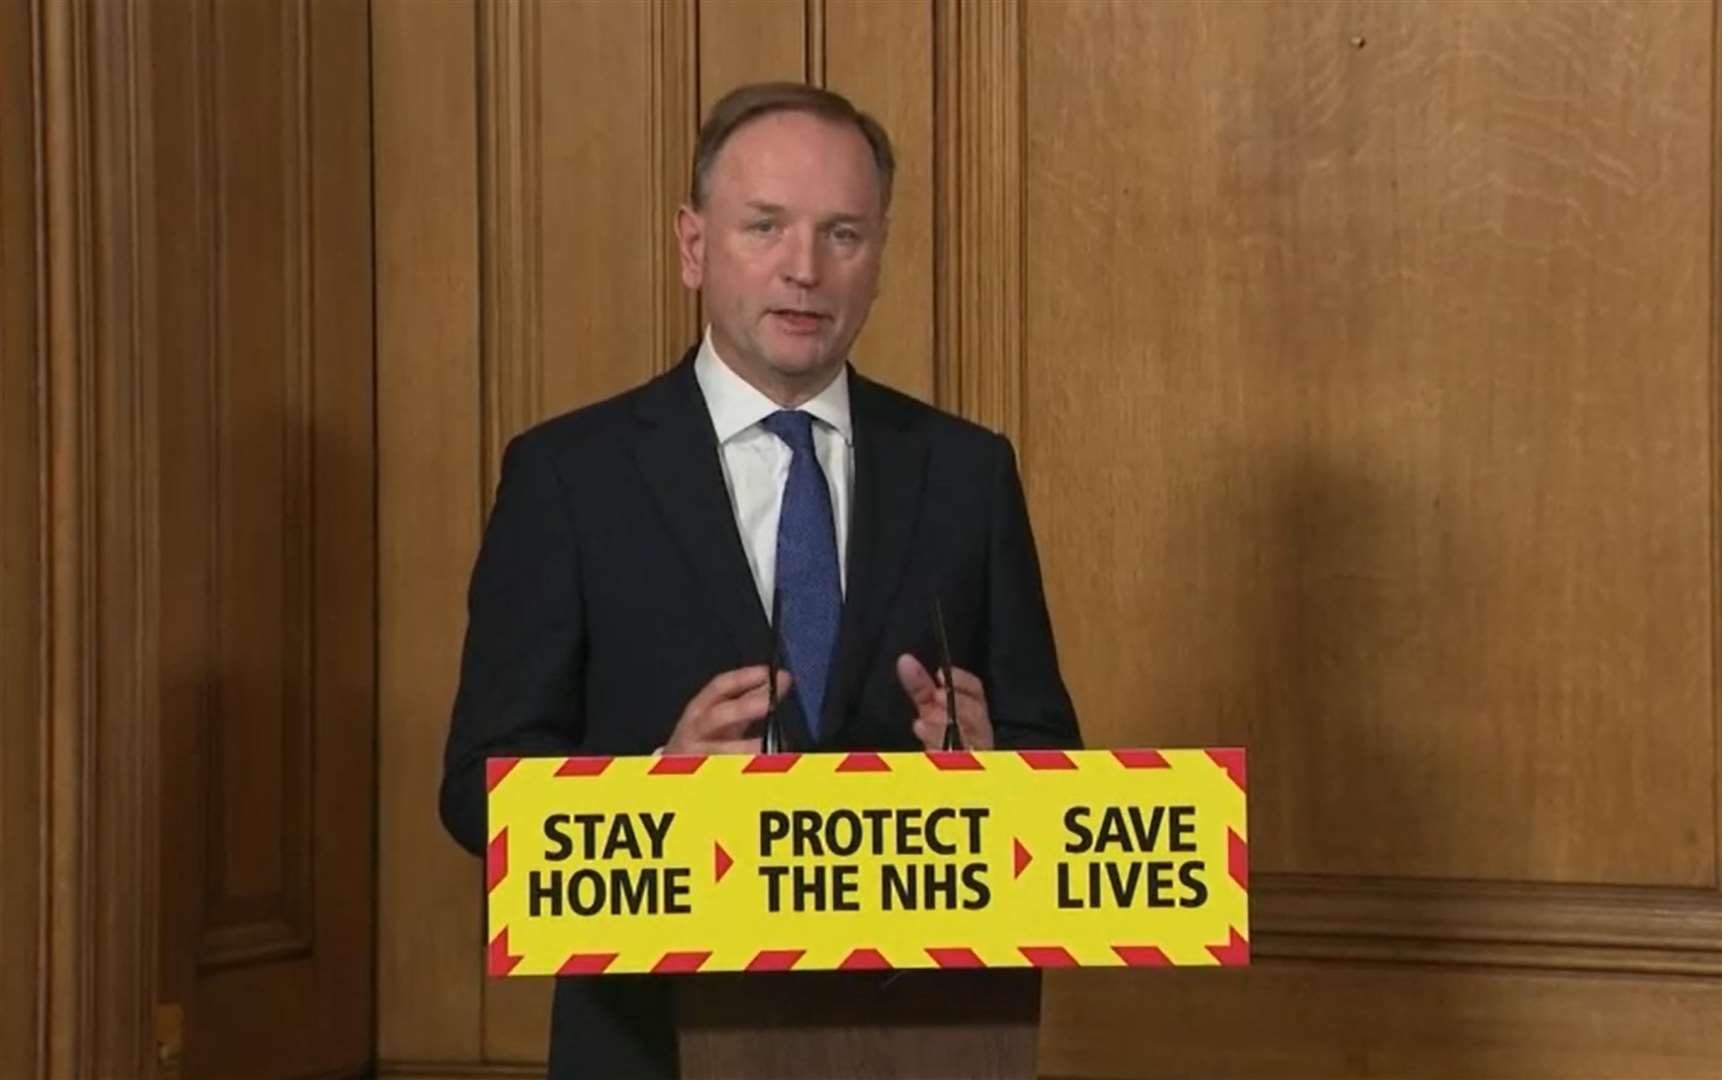 Sir Simon Stevens, chief executive of the NHS in England, said there had been an increase of 10,000 hospitalised coronavirus patients just since Christmas Day (PA)